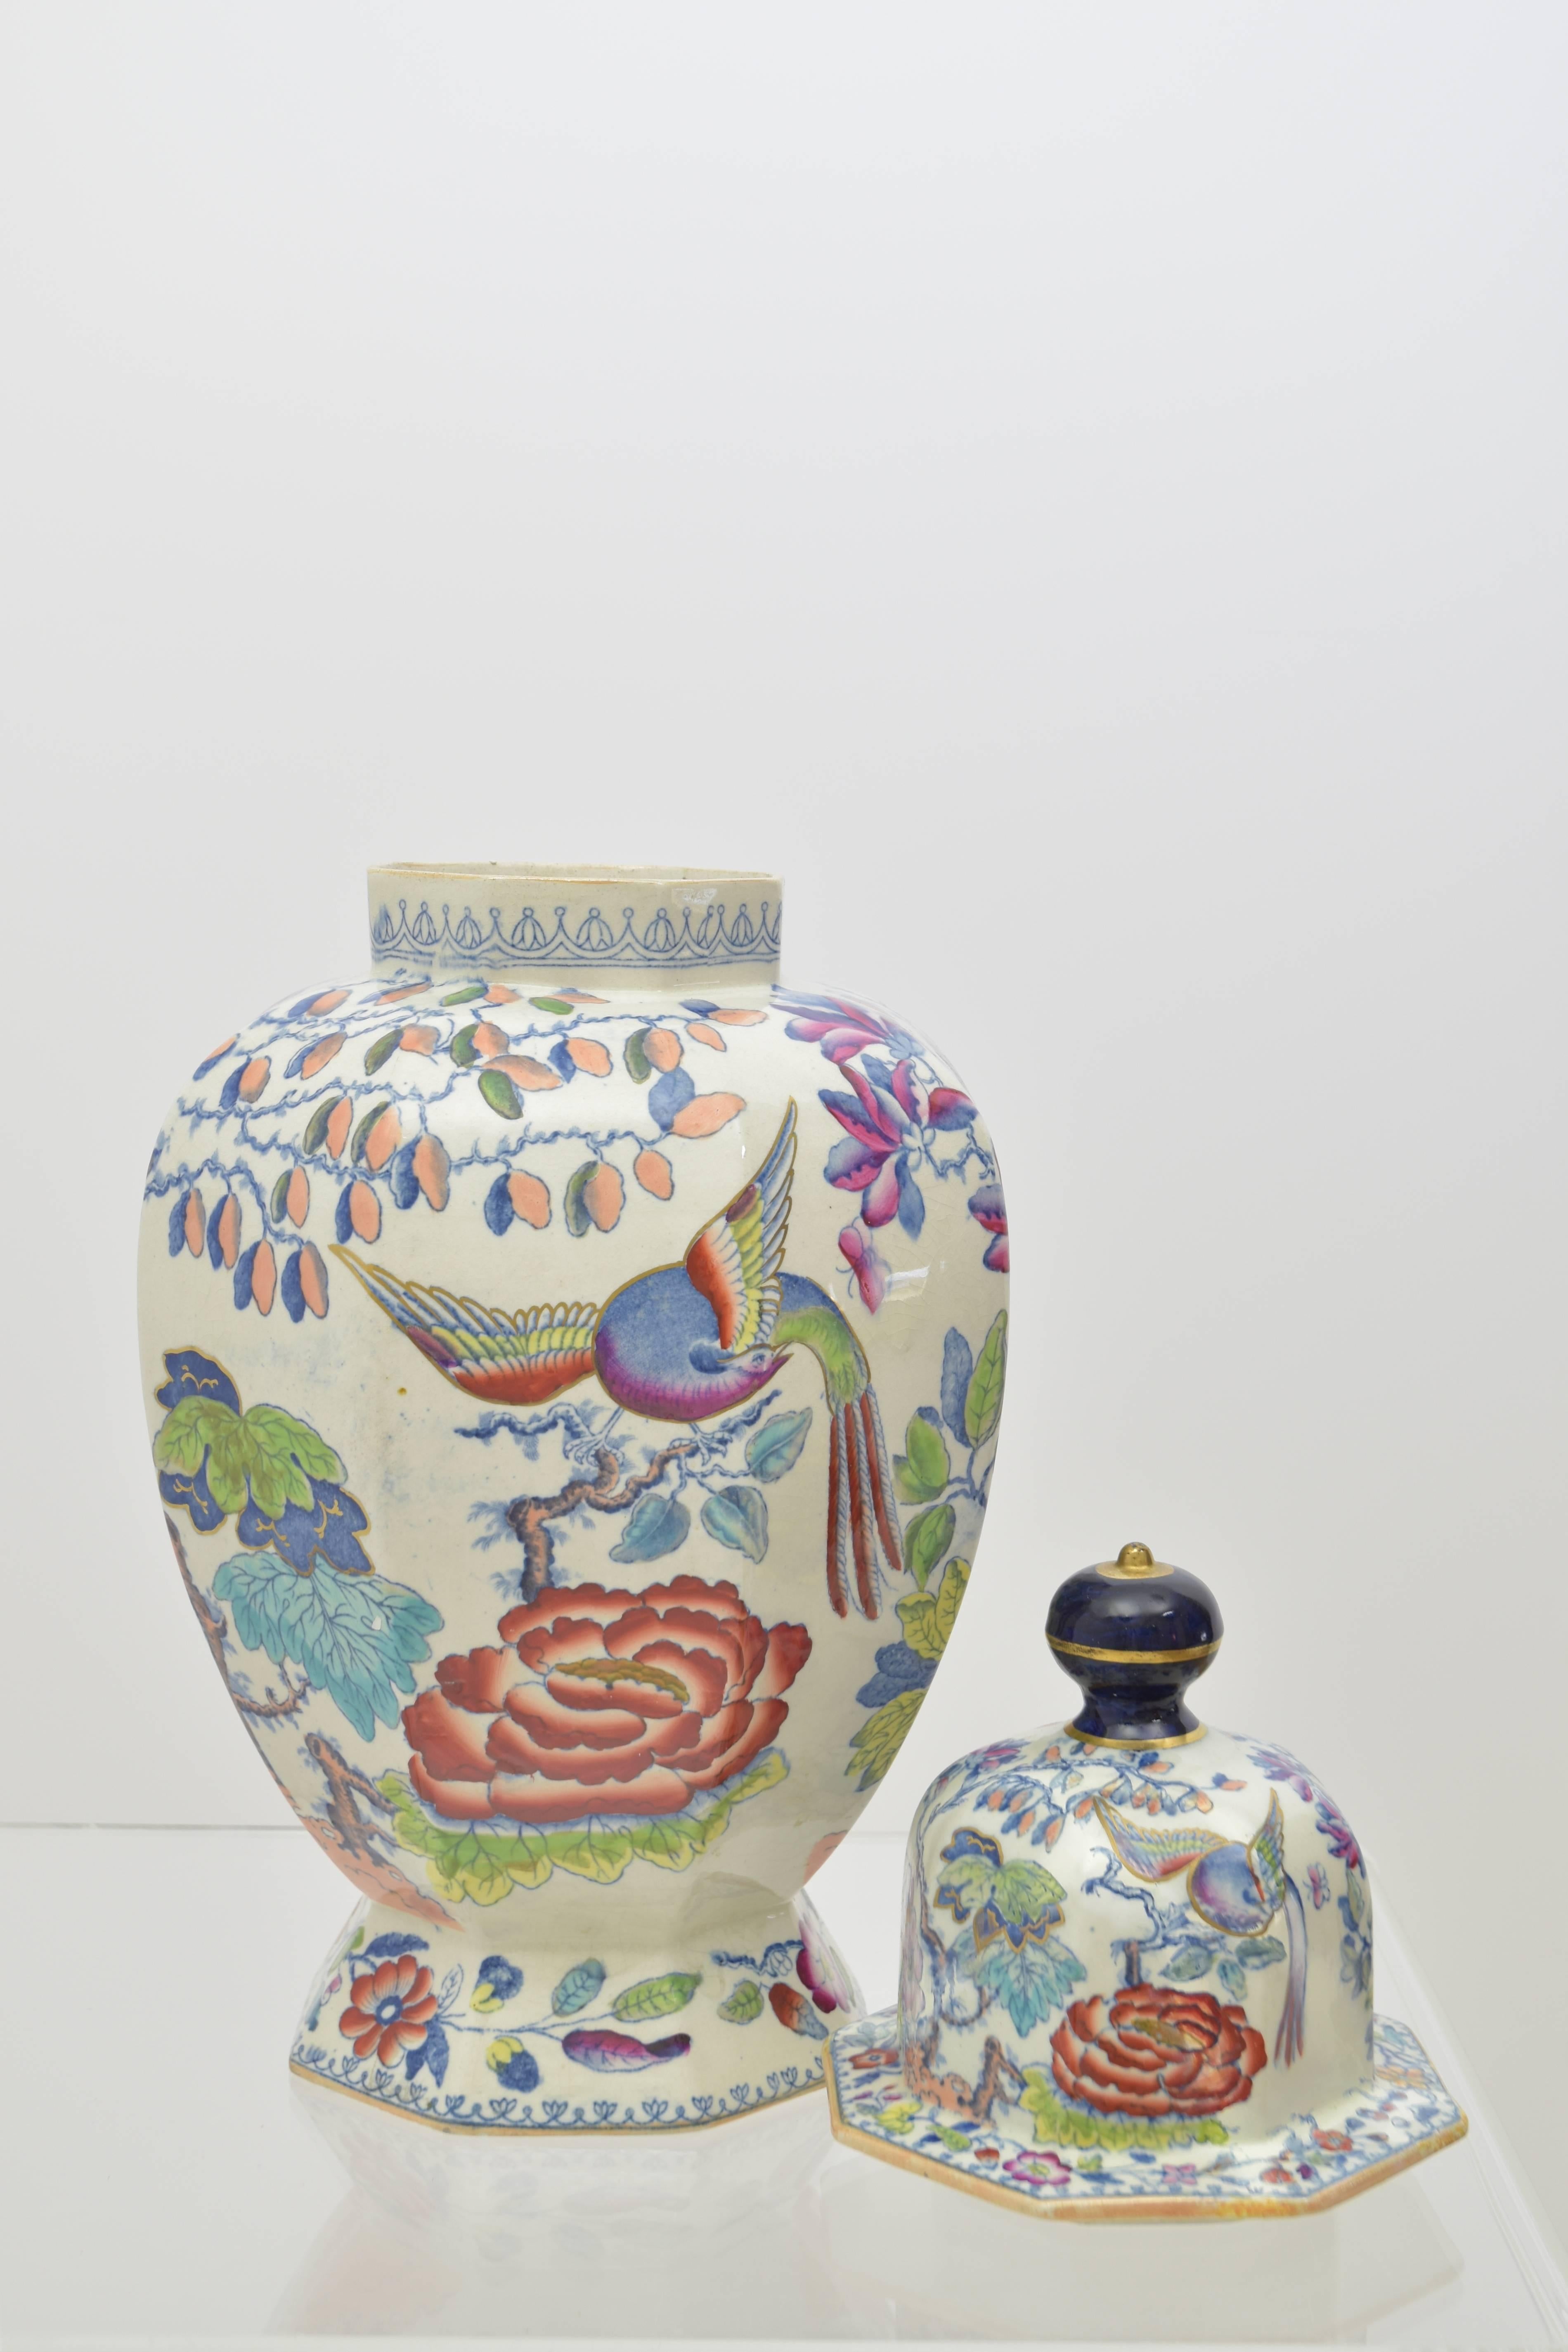 Mason's ironstone lidded jar or vase with bird and floral decoration.